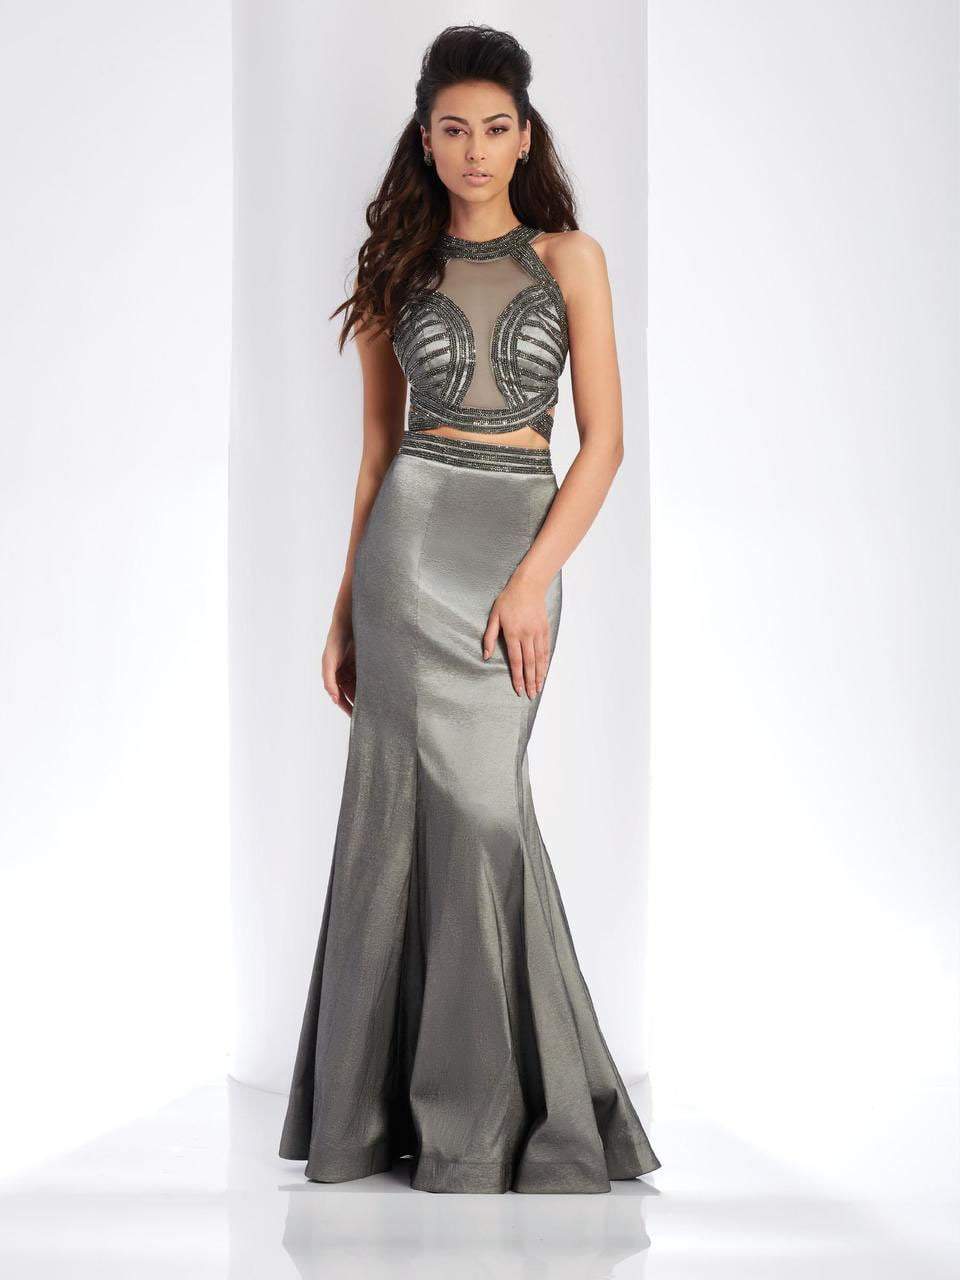 Clarisse - 3410 Embellished Illusion Halter Mermaid Dress Special Occasion Dress